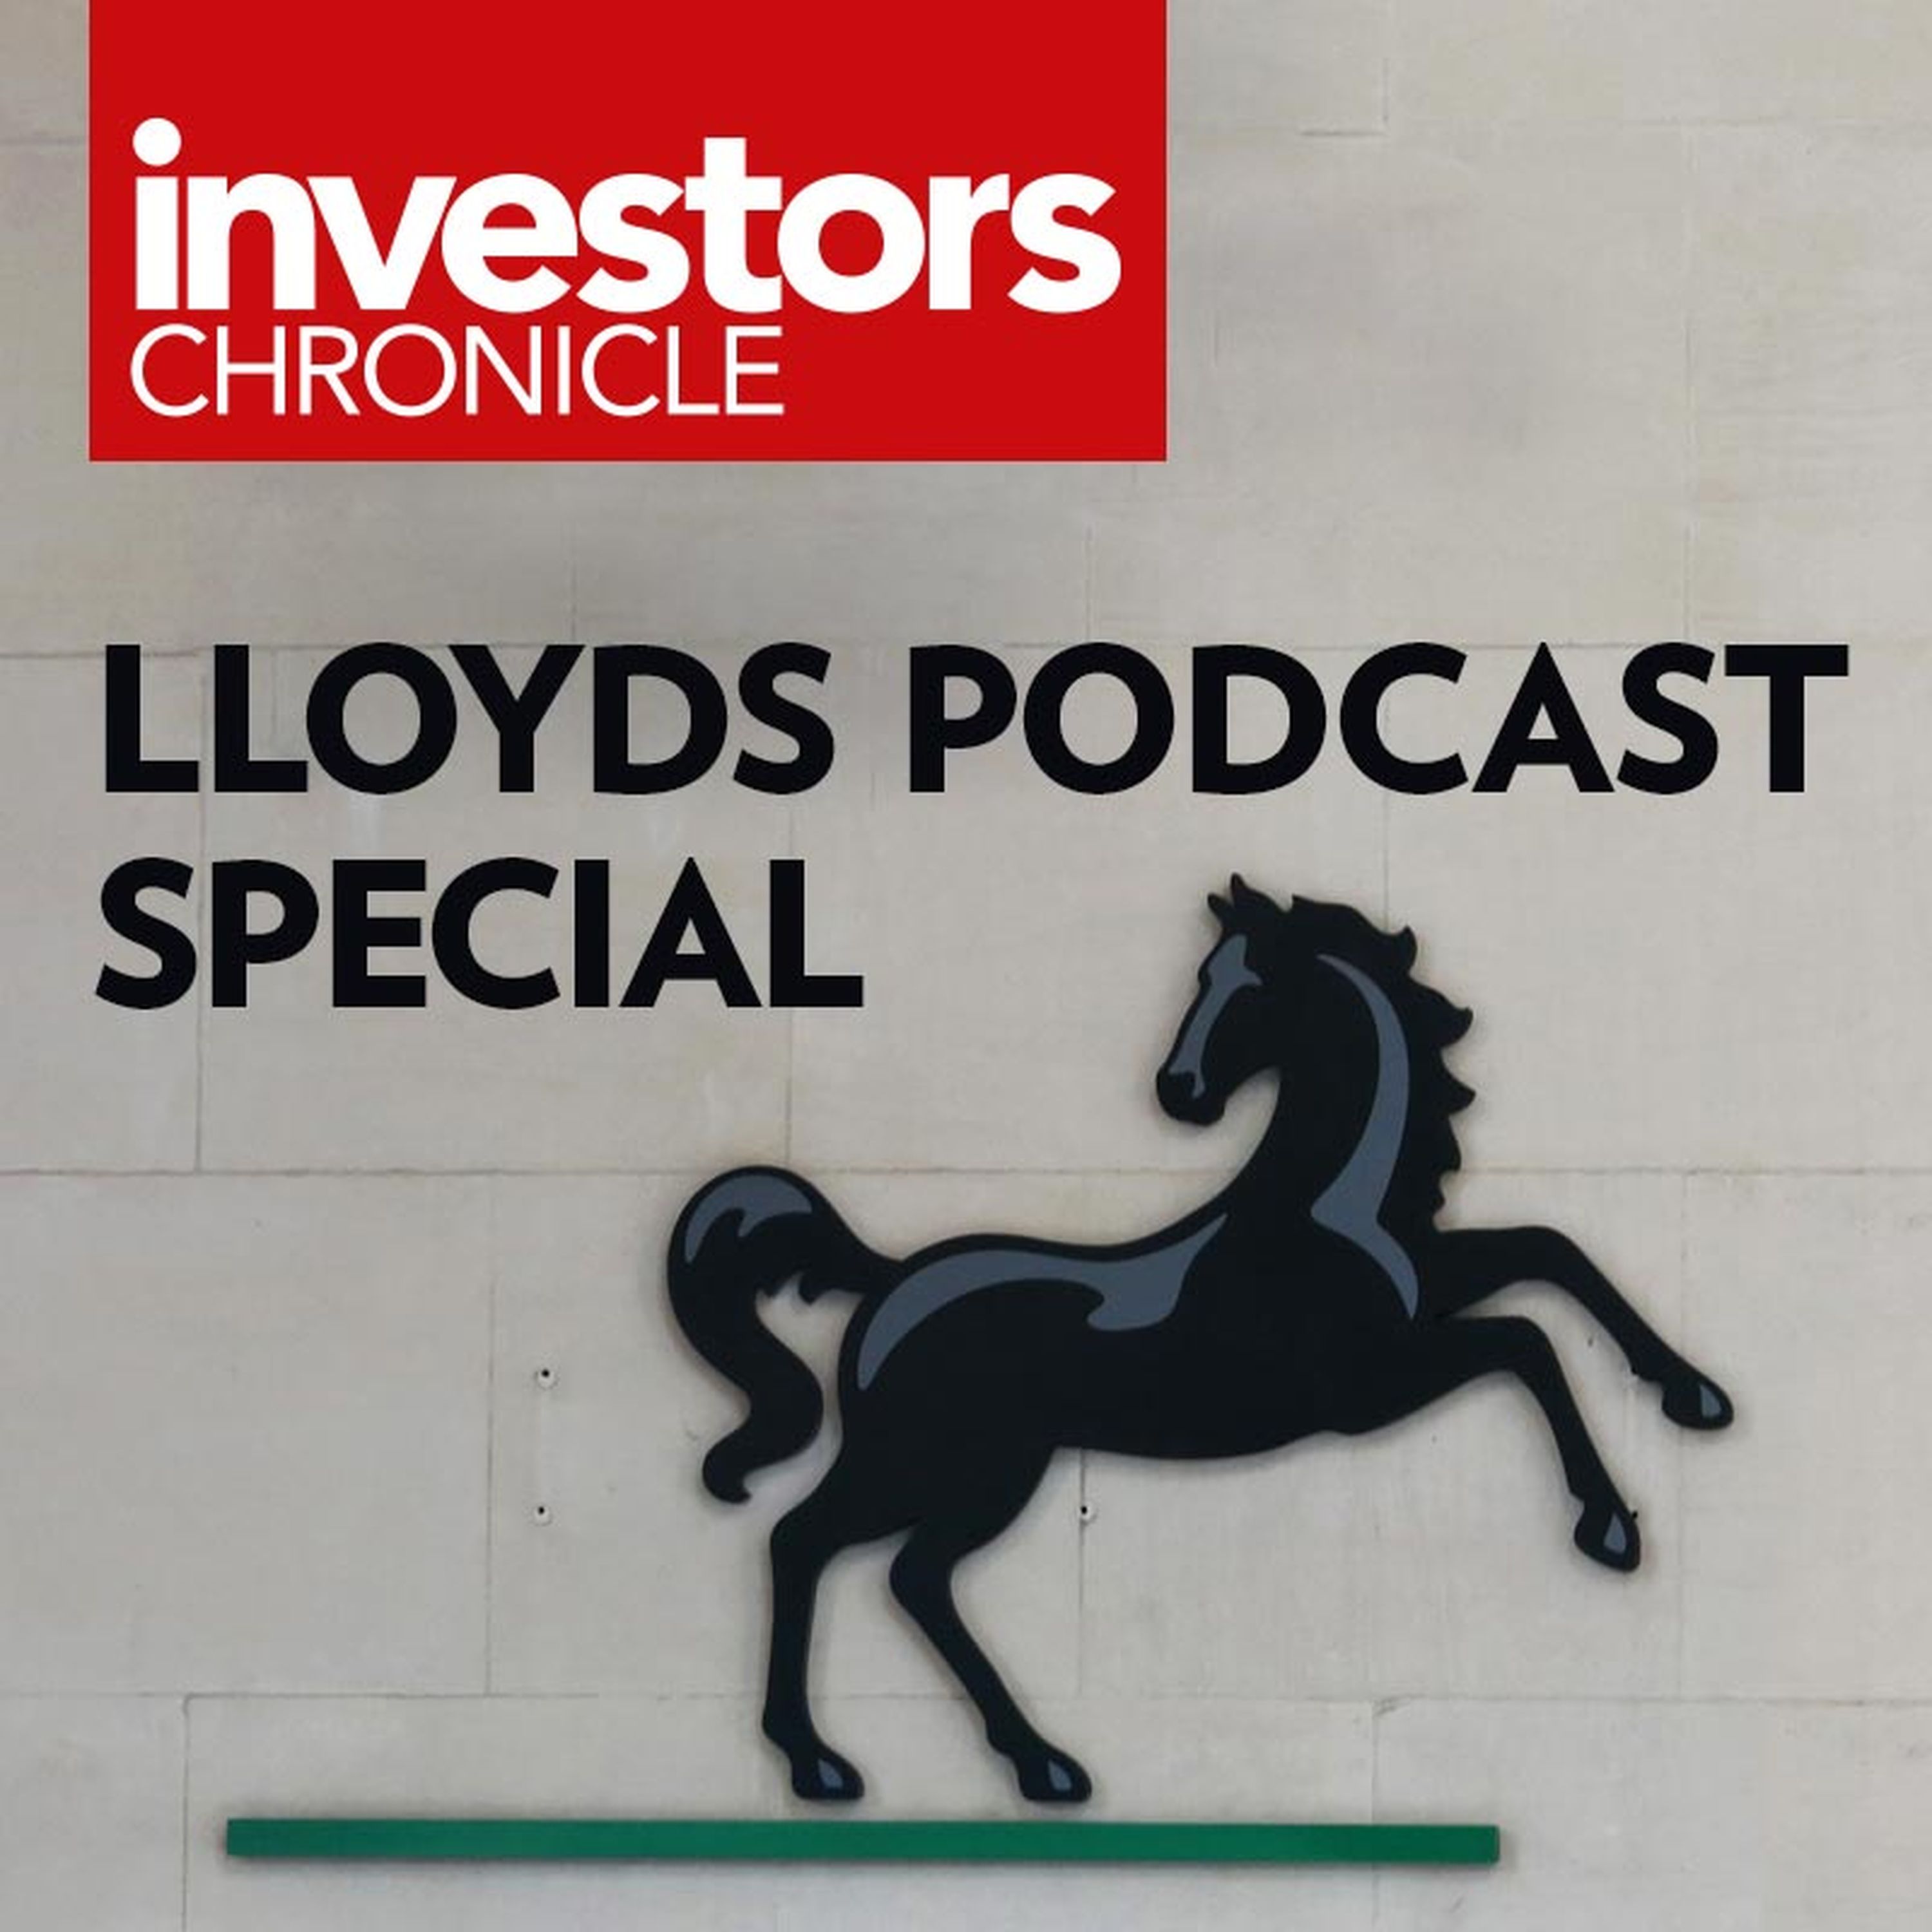 Lloyds podcast special: the sell case